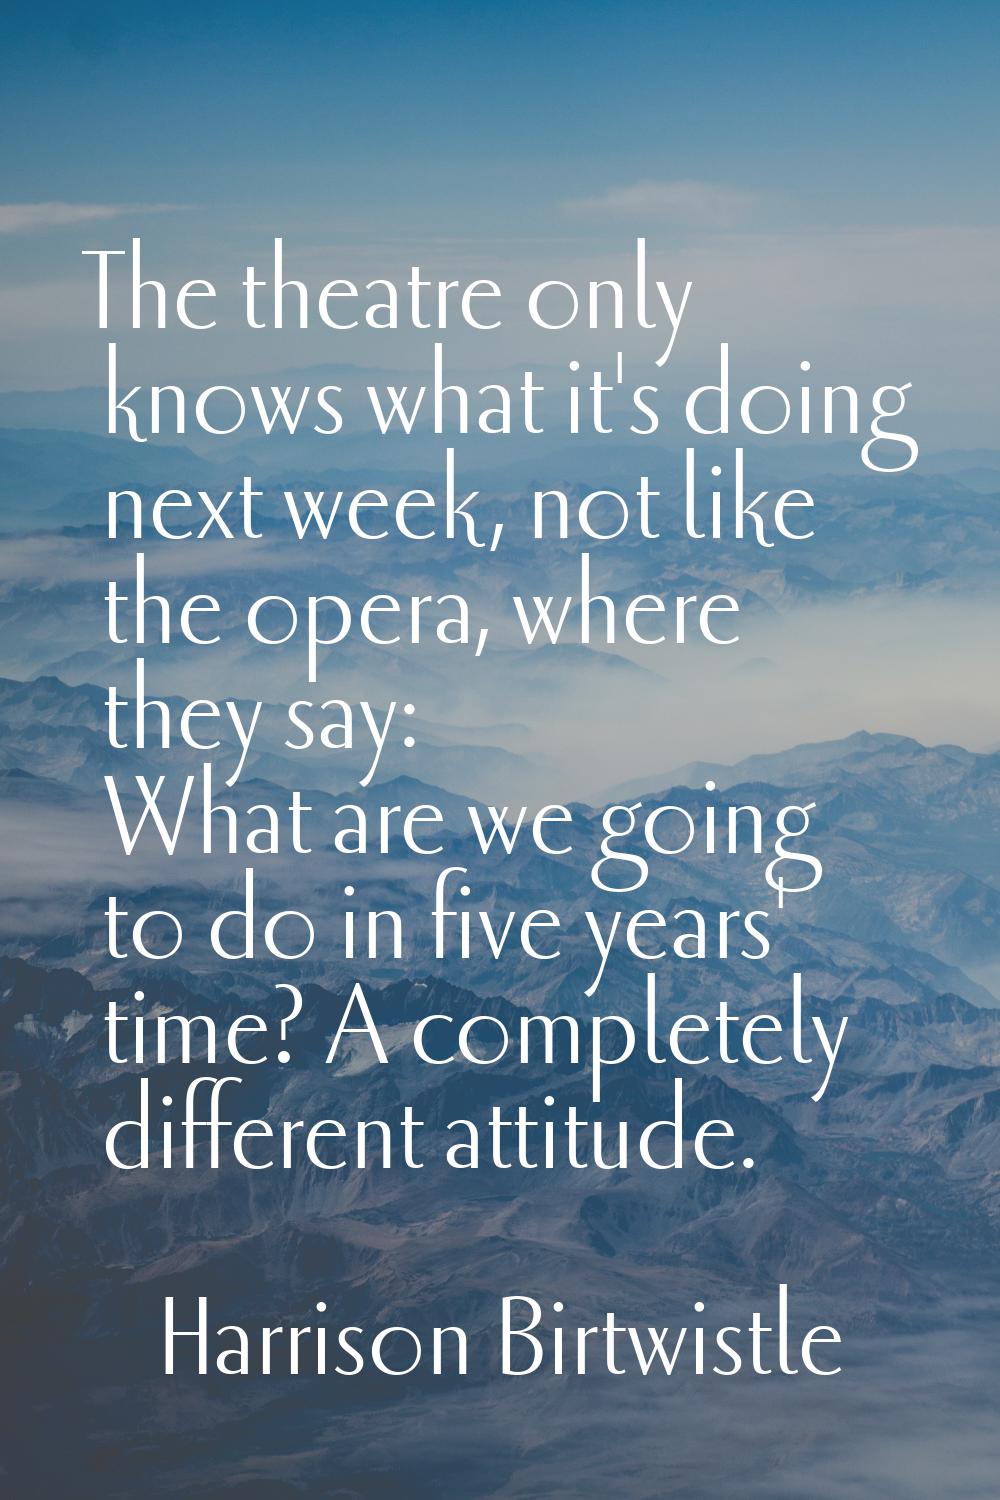 The theatre only knows what it's doing next week, not like the opera, where they say: What are we g